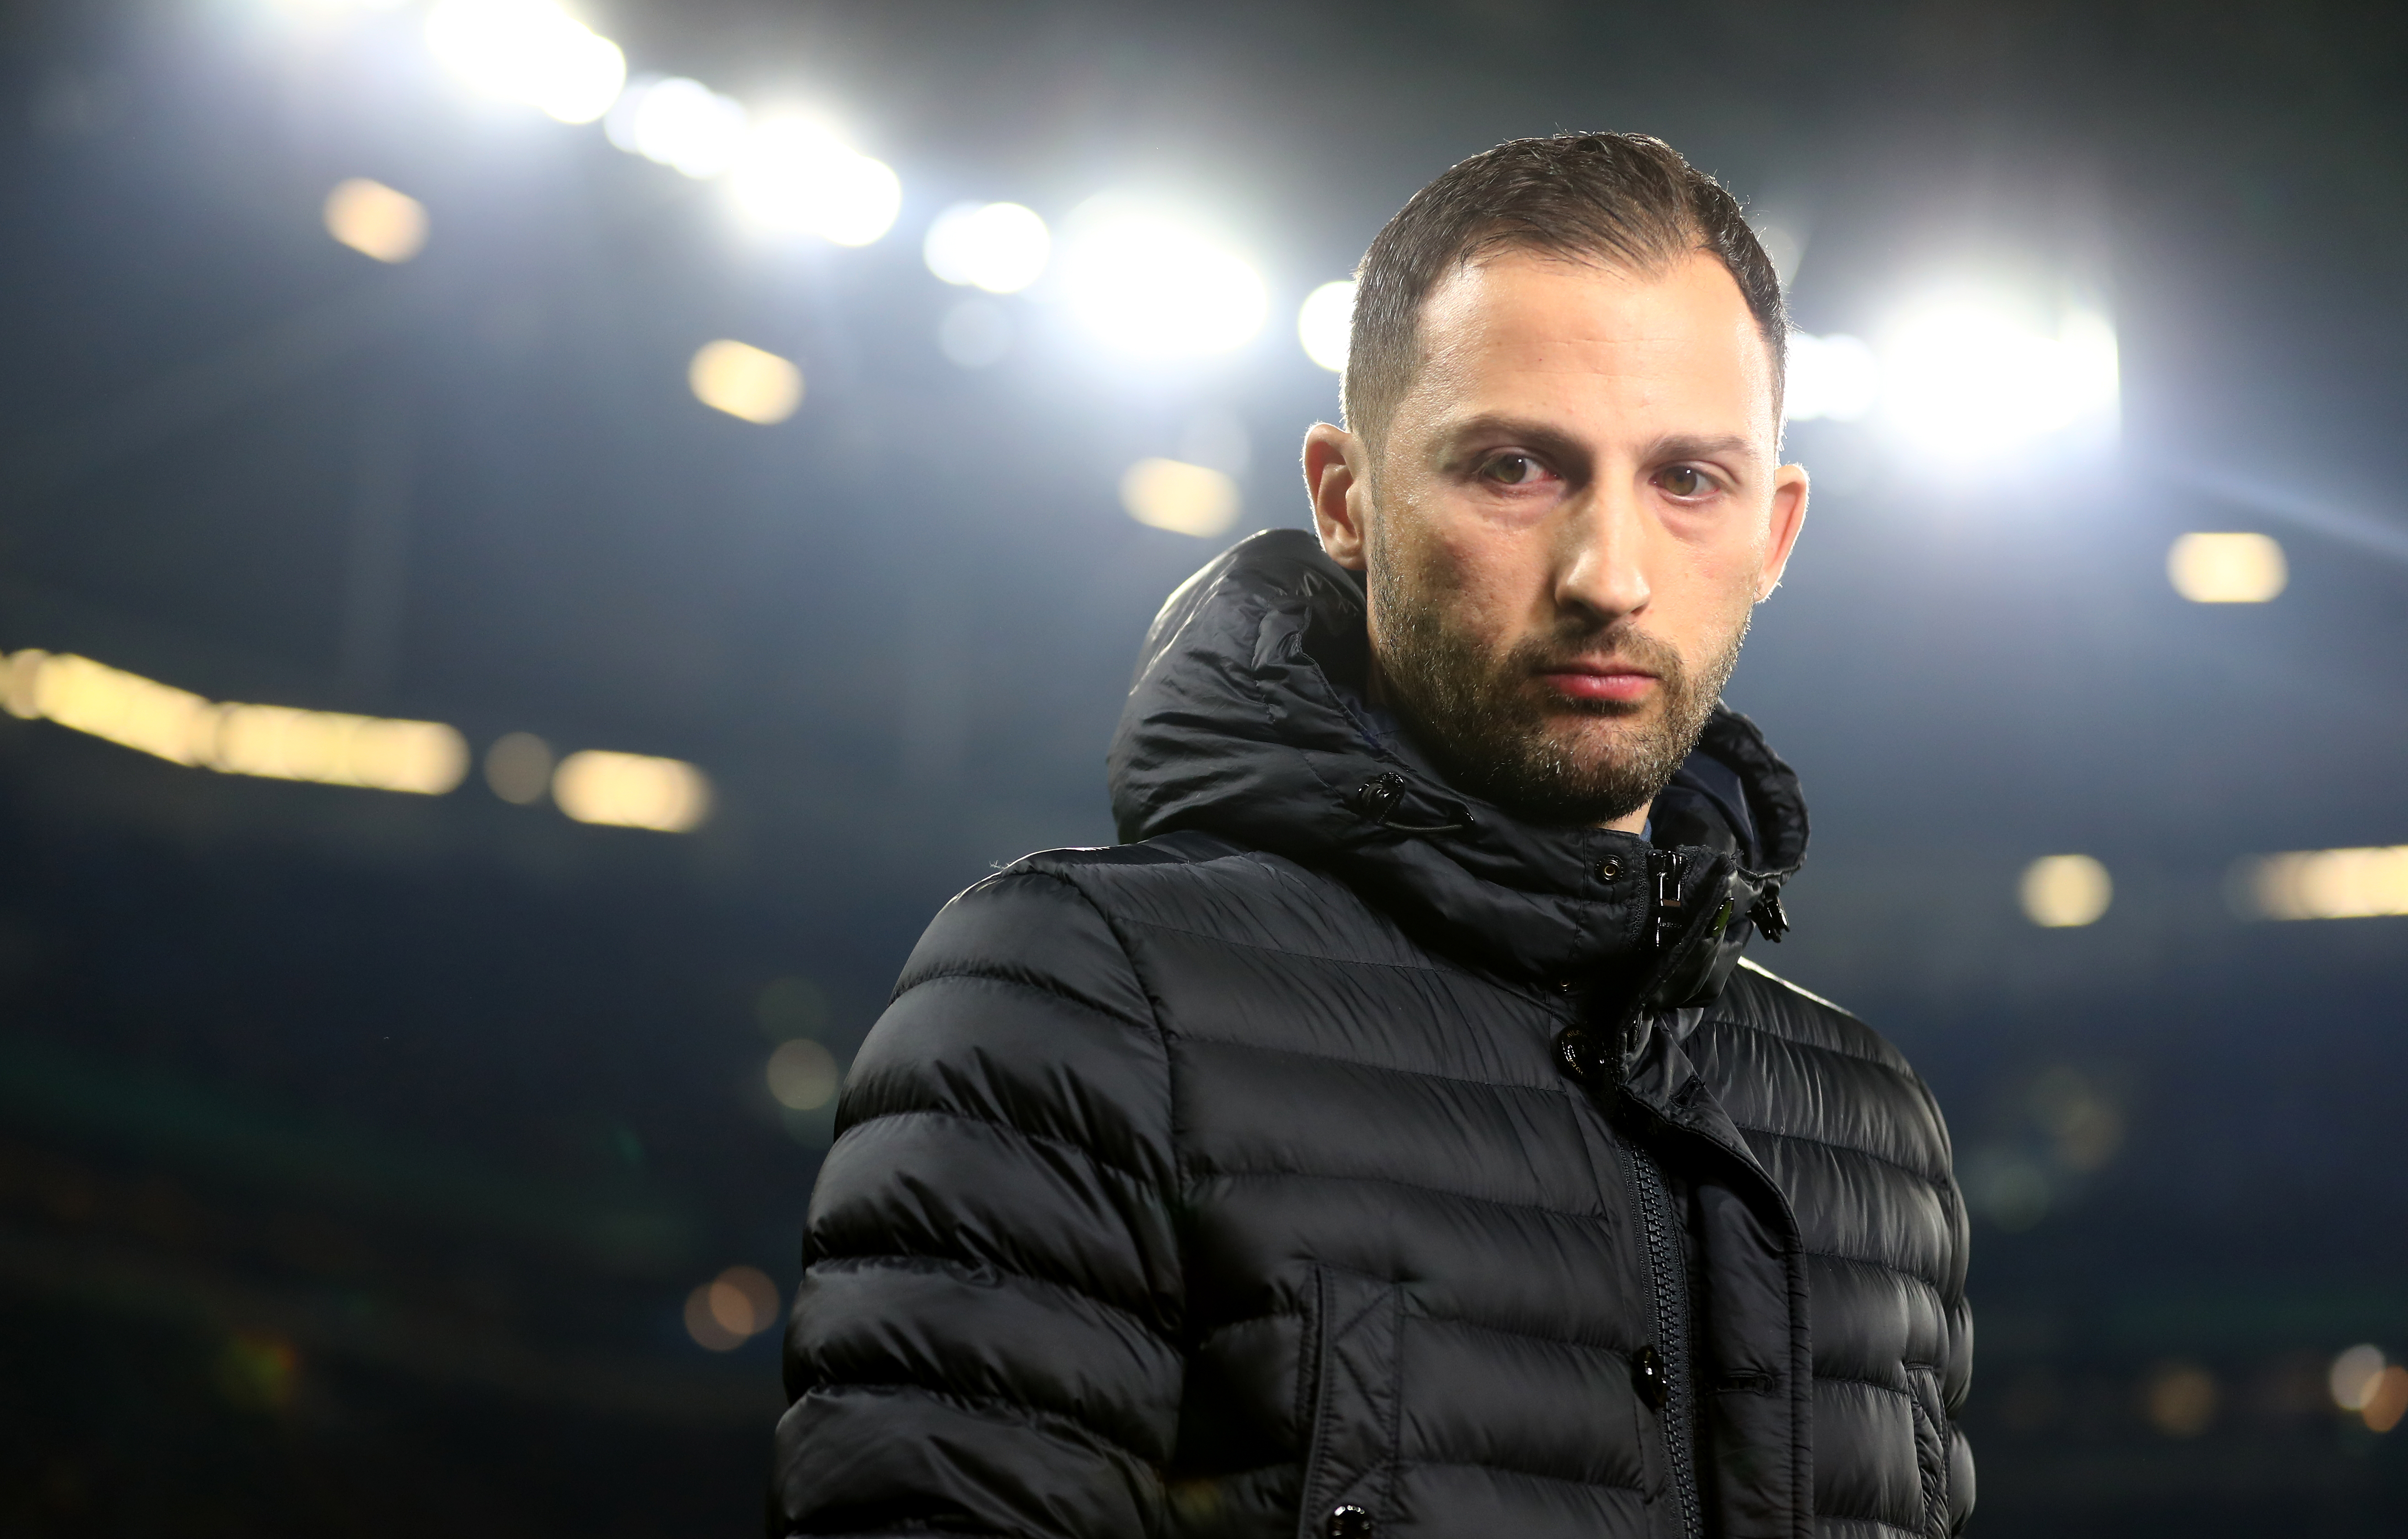 GELSENKIRCHEN, GERMANY - FEBRUARY 06: Head coach Domenico Tedesco of Schalke looks on during the DFB Pokal Cup match between FC Schalke 04 and Fortuna Duesseldorf at Veltins-Arena on February 06, 2019 in Gelsenkirchen, Germany. (Photo by Lars Baron/Bongarts/Getty Images)